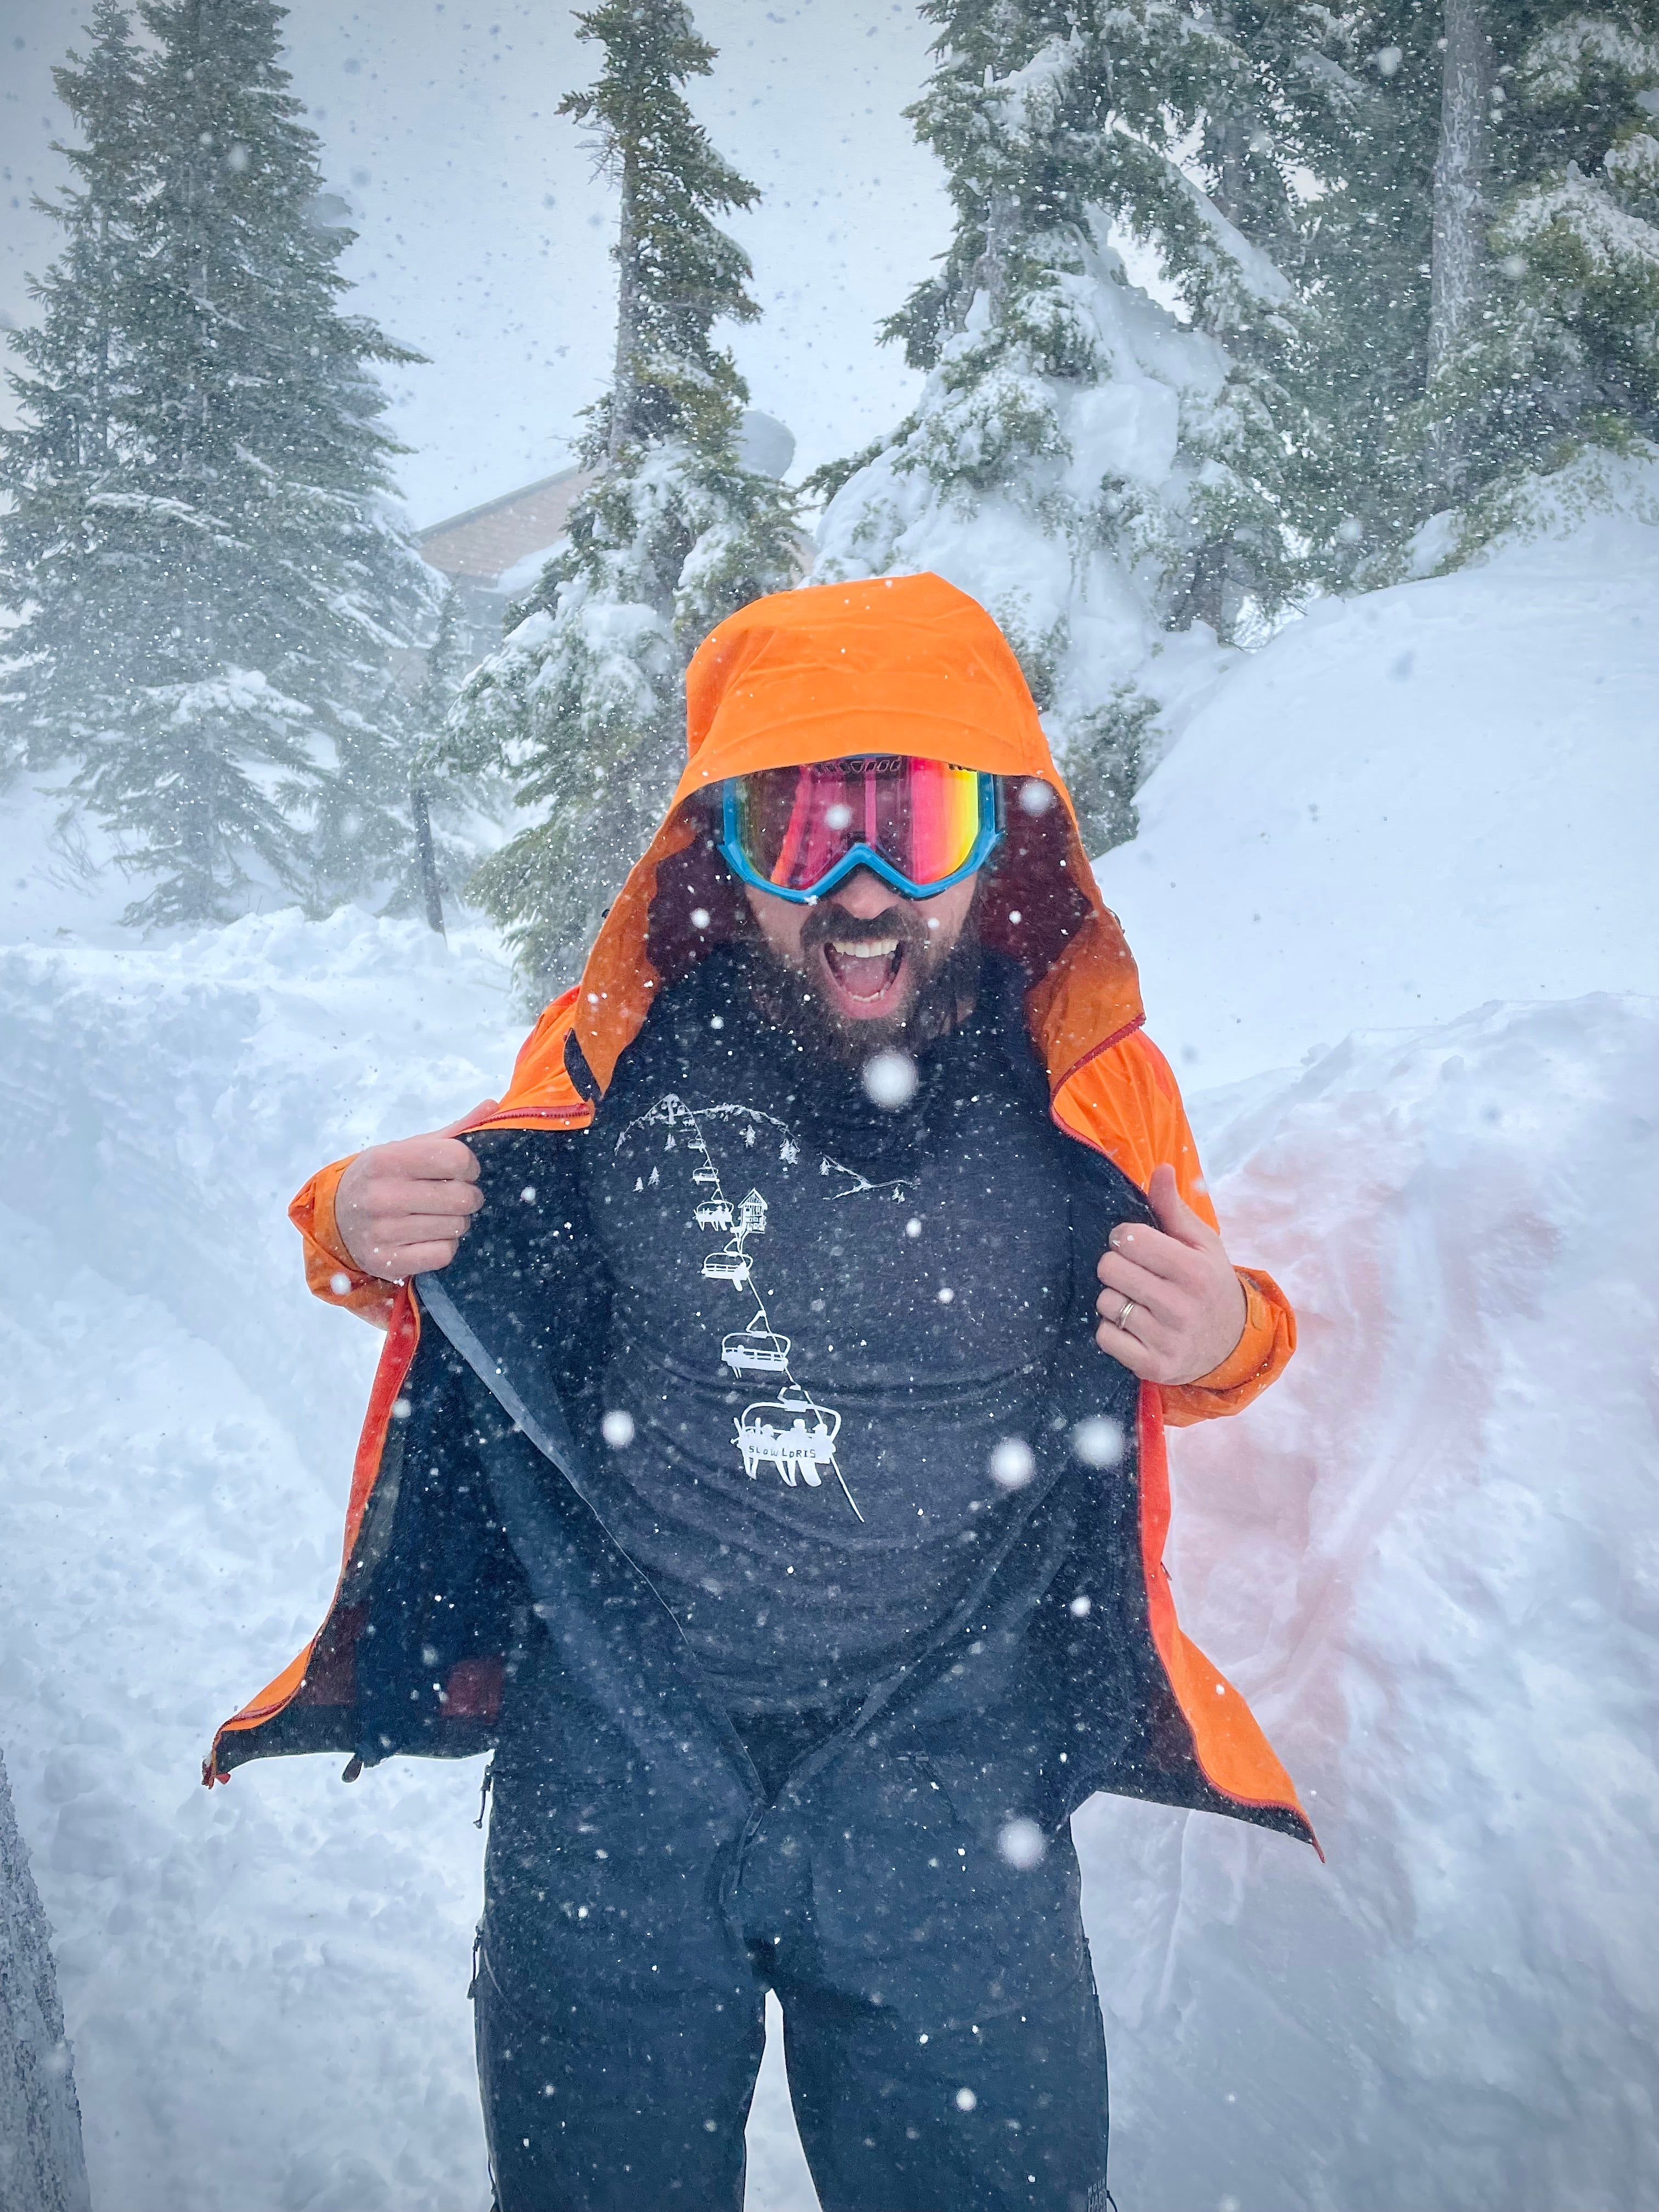 Smiling man in snowstorm, opening snowsuit to reveal t shirt printed with chairlift.